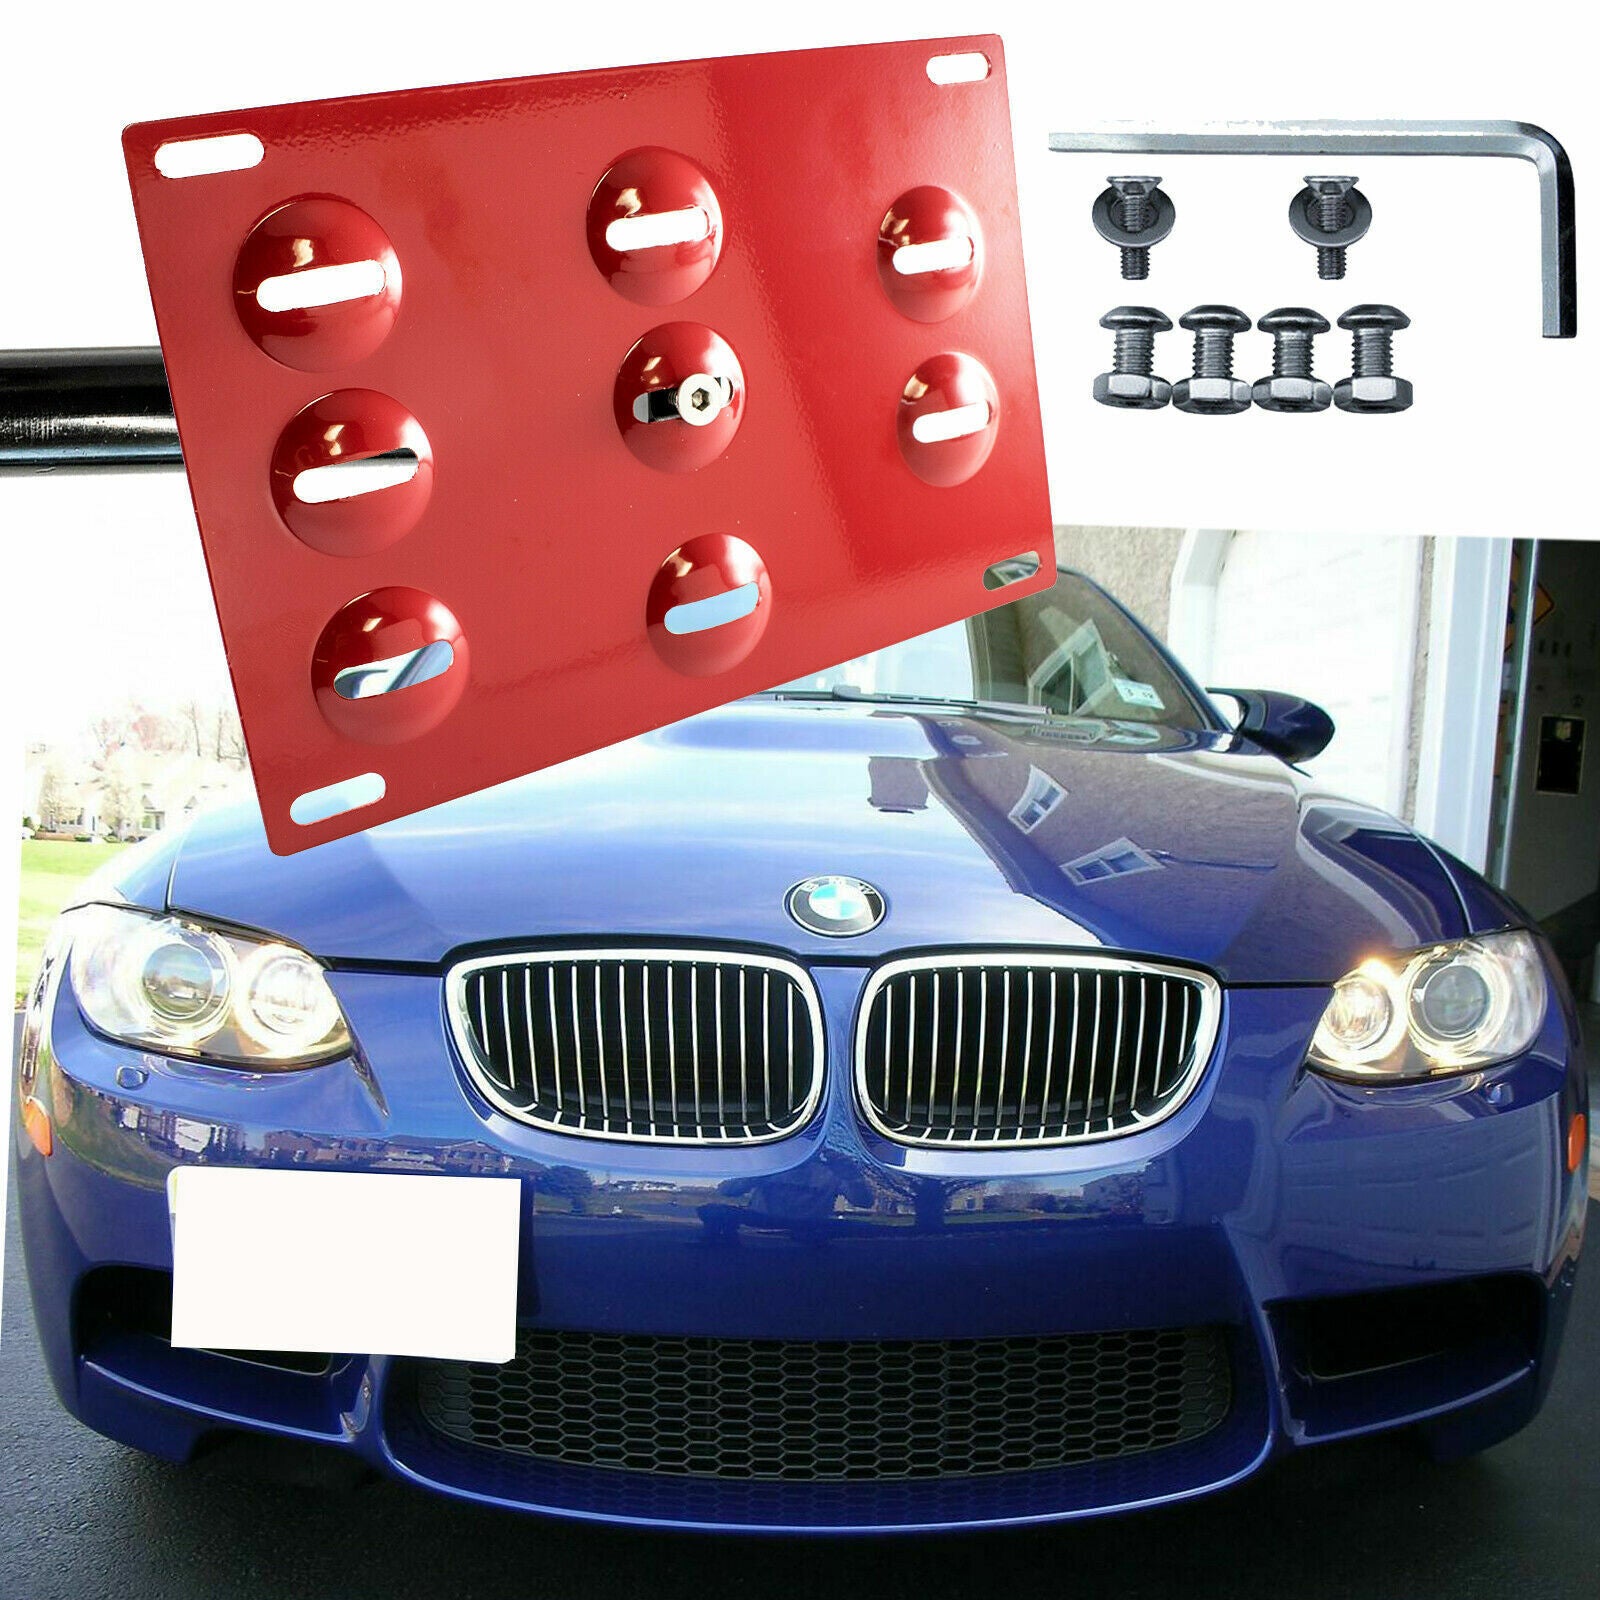 Red Tow Hook License Plate Mounting Bracket For BMW 325i 328i 330i E70